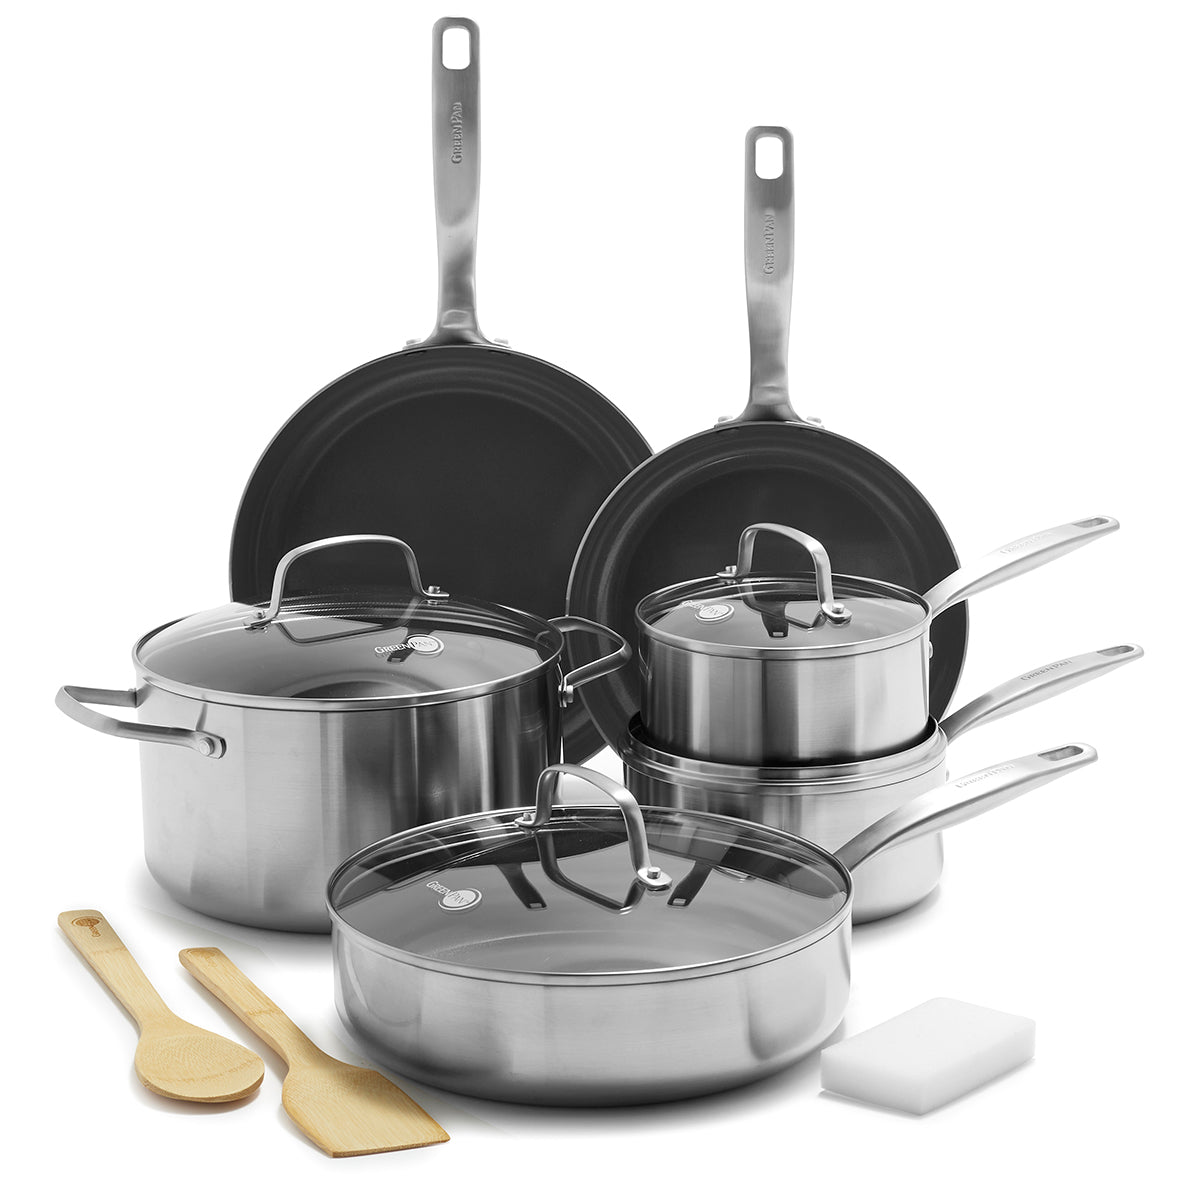 Cookware Set, 12 Piece Pots and Pans with Utensils, Nonstick